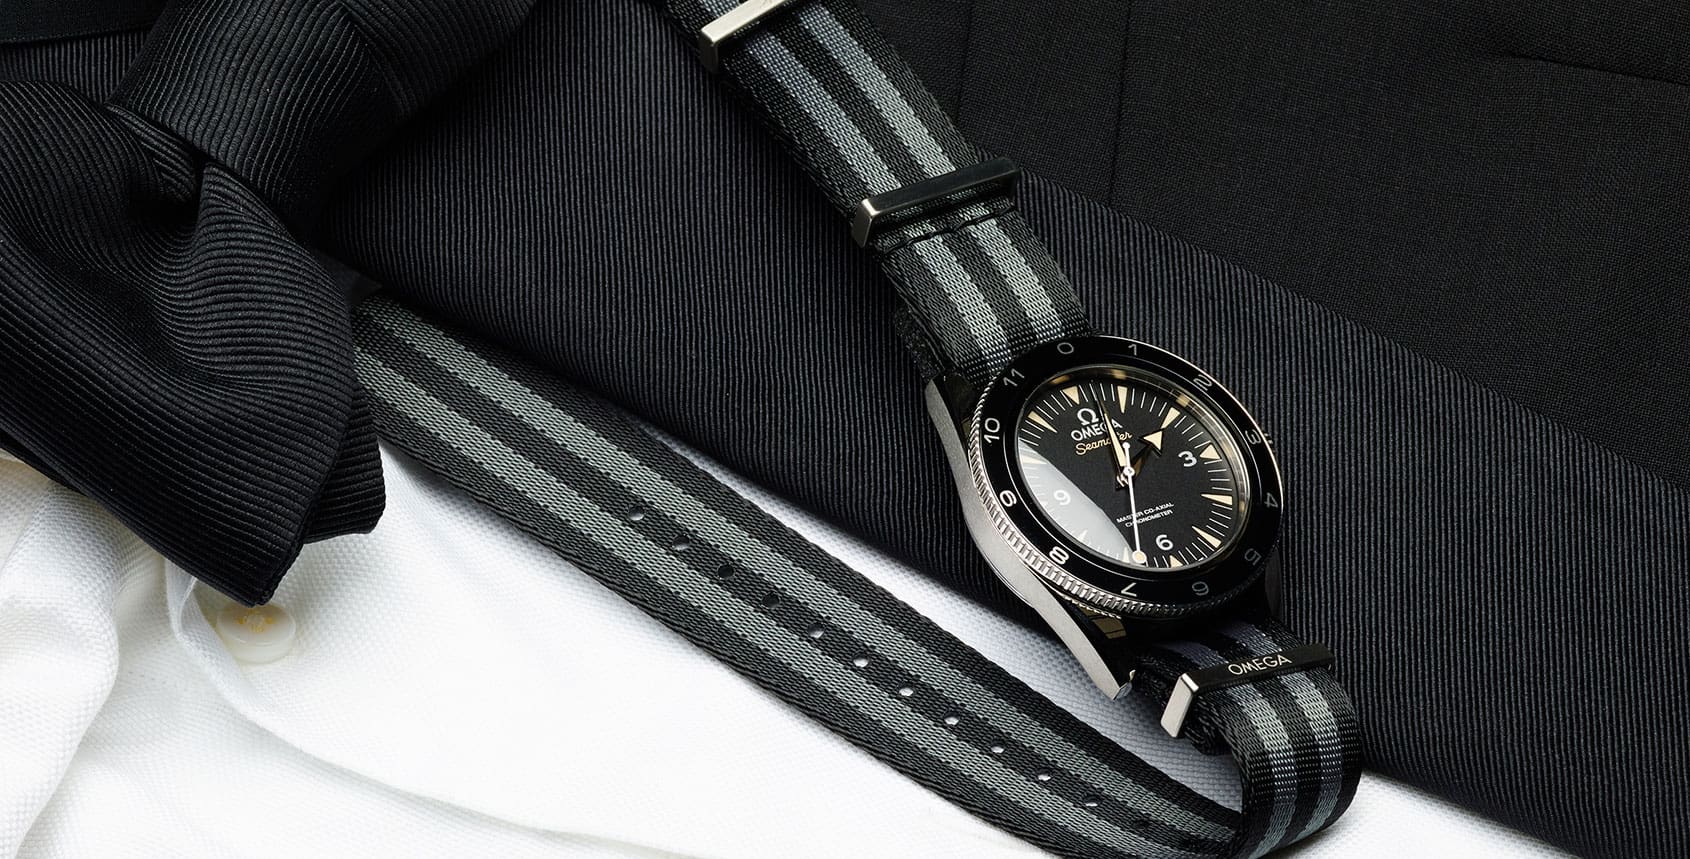 Will the next 007 be a woman? And if so, will she wear a Seamaster?